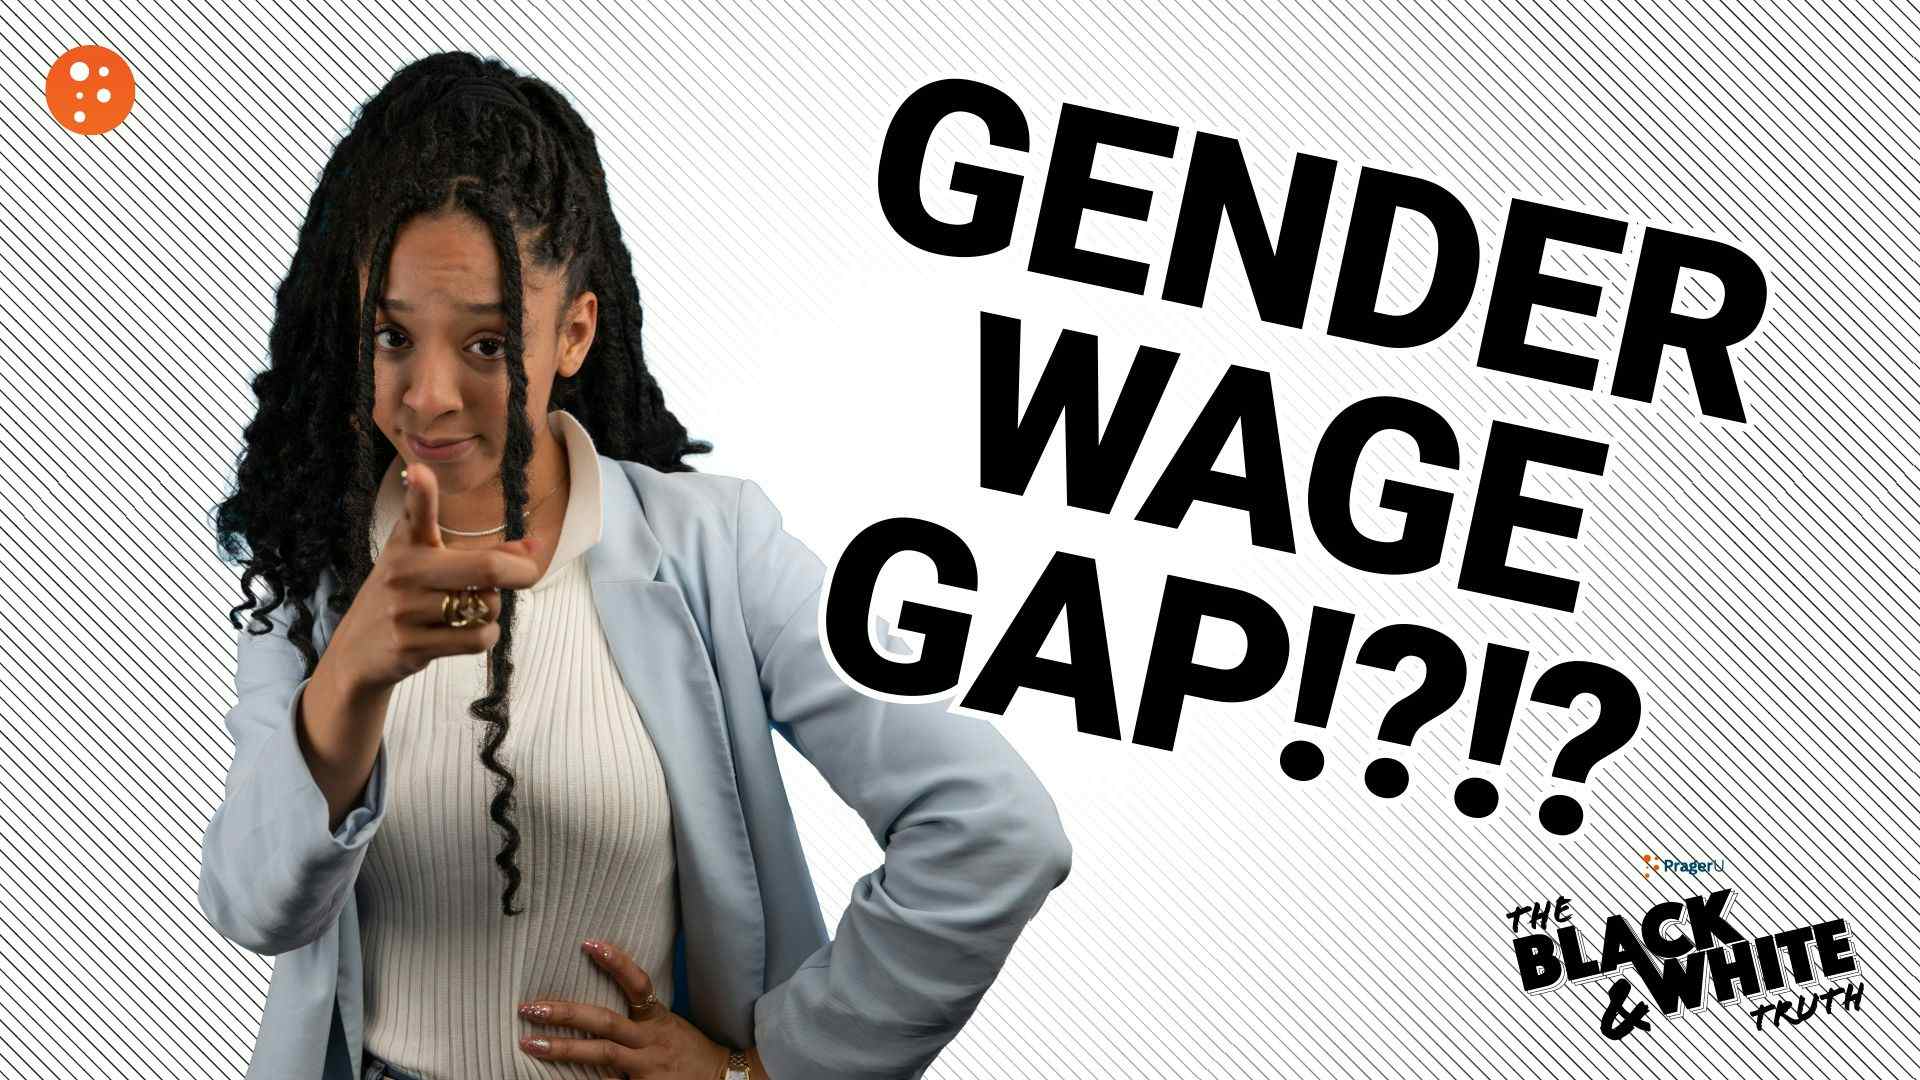 The Black and White Truth: The Gender Wage Gap